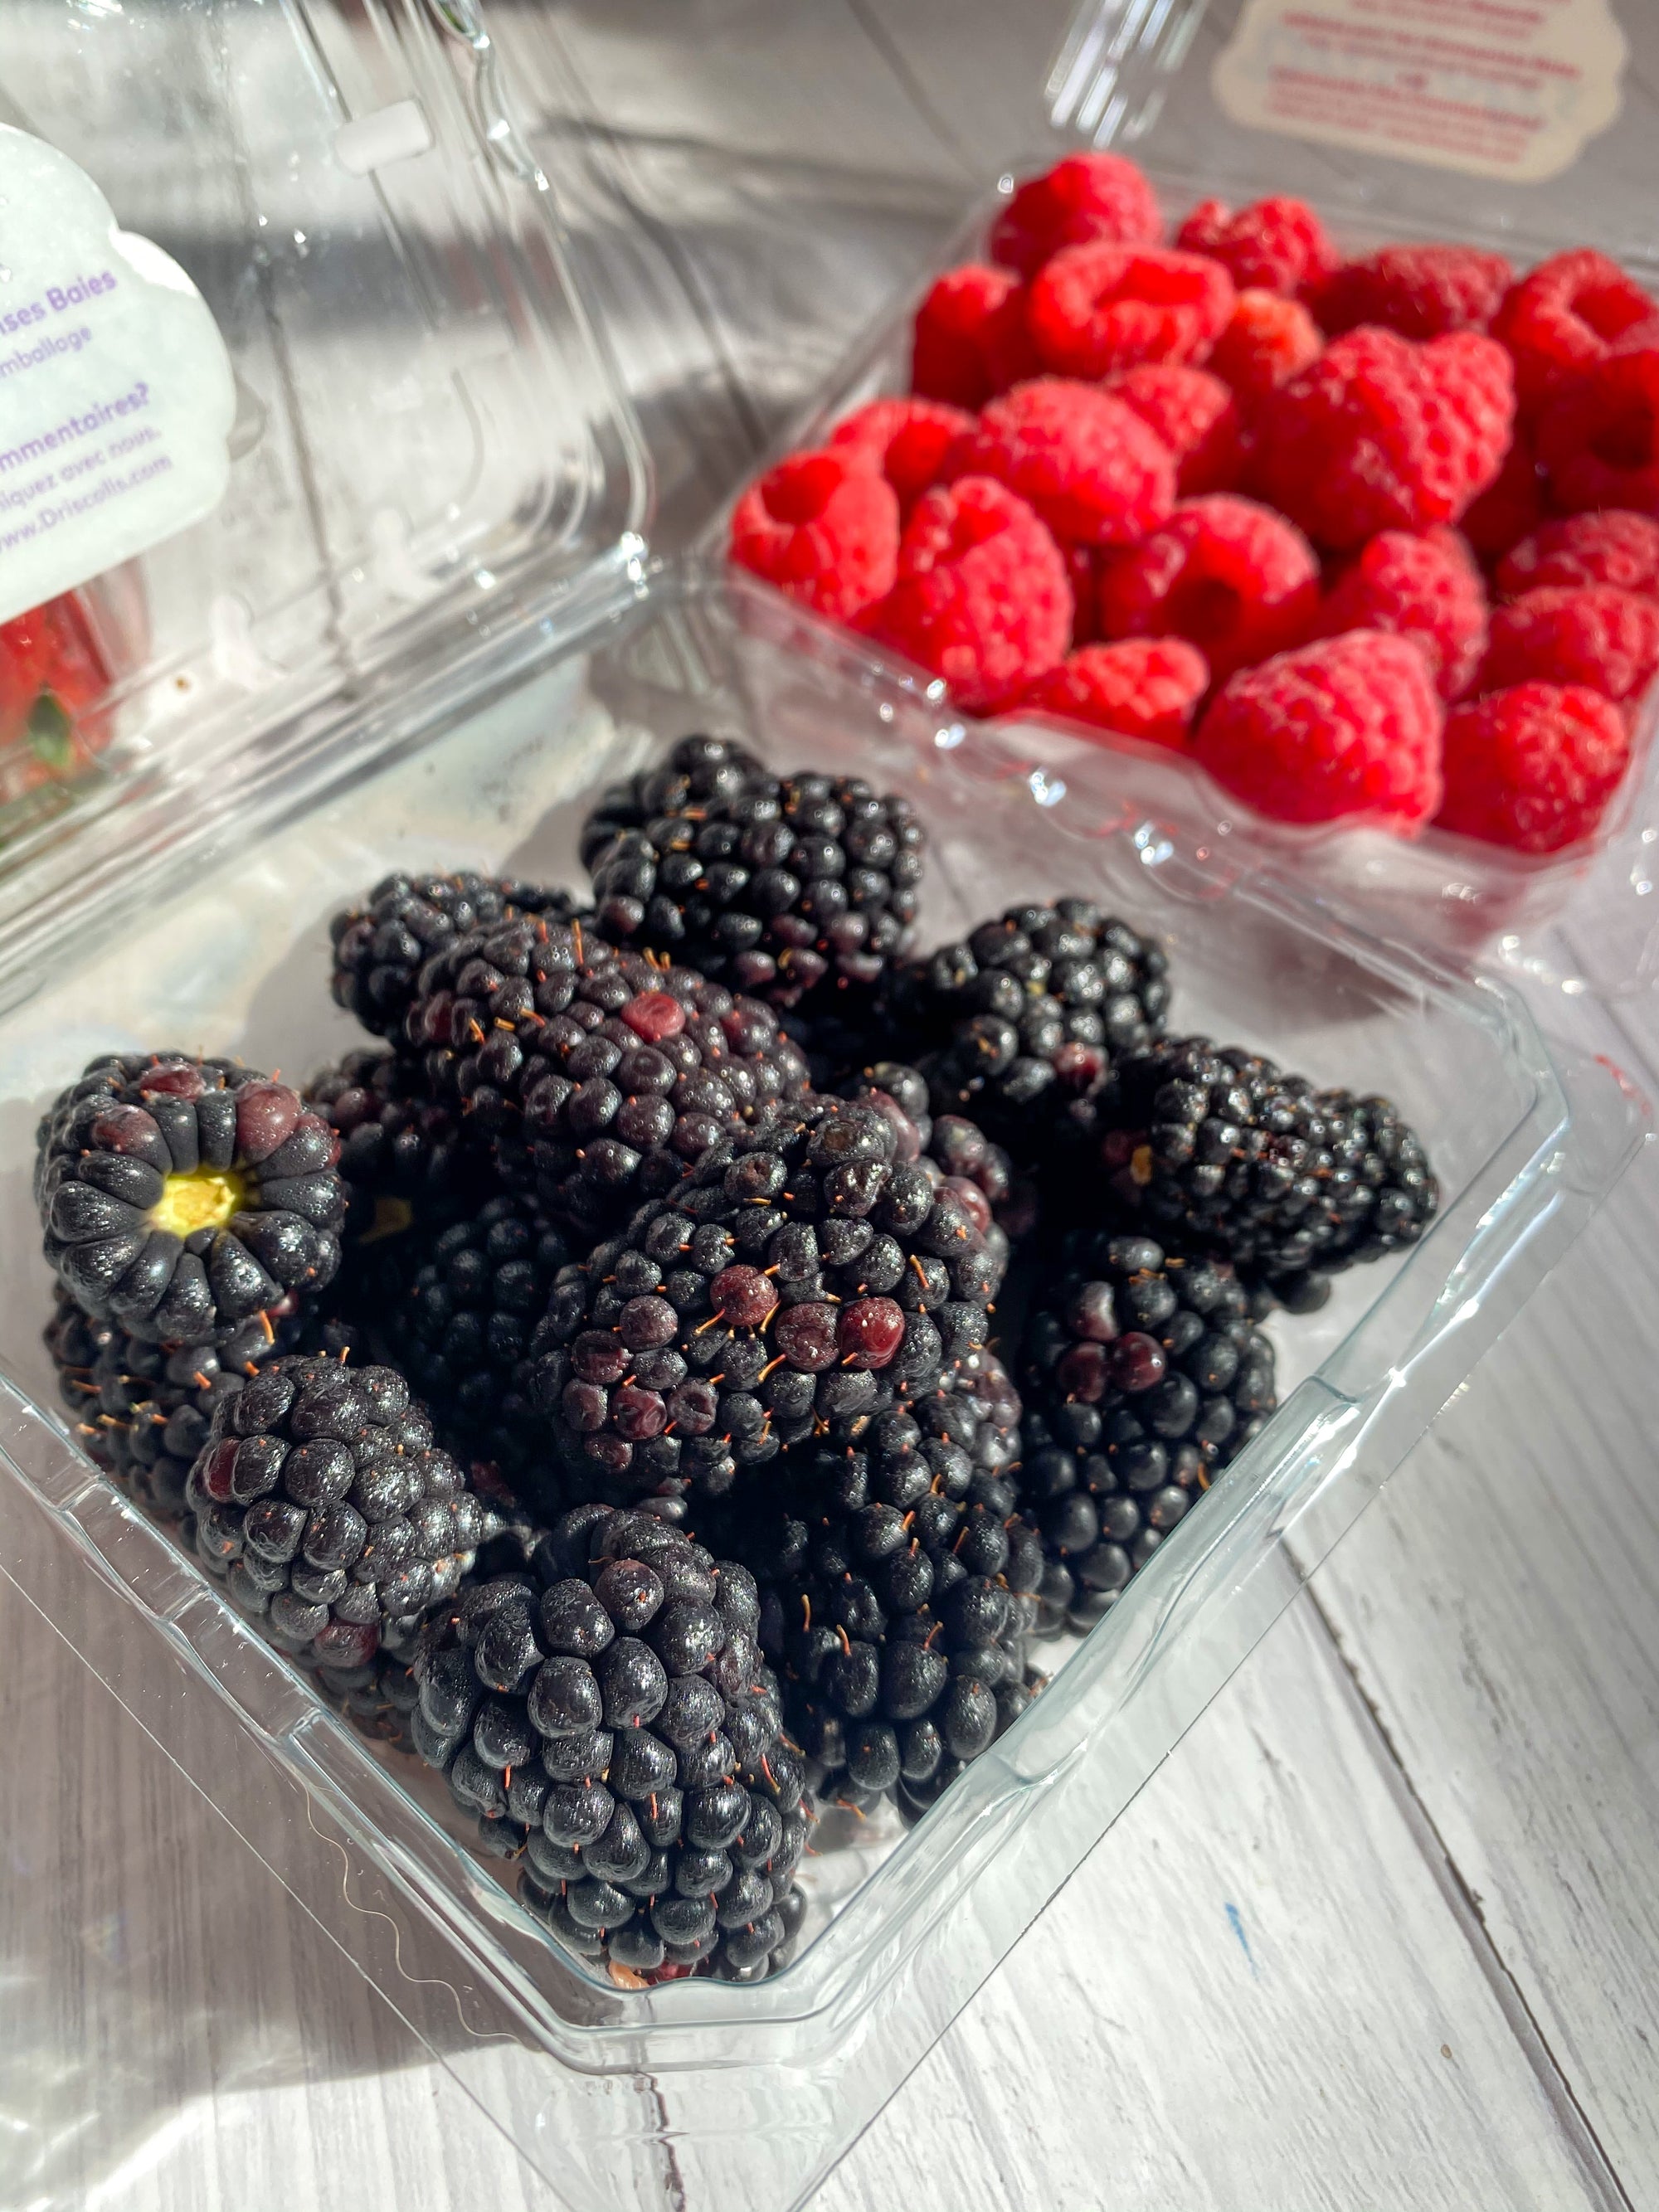 Buy 2 Driscoll's Blackberries for Php 900